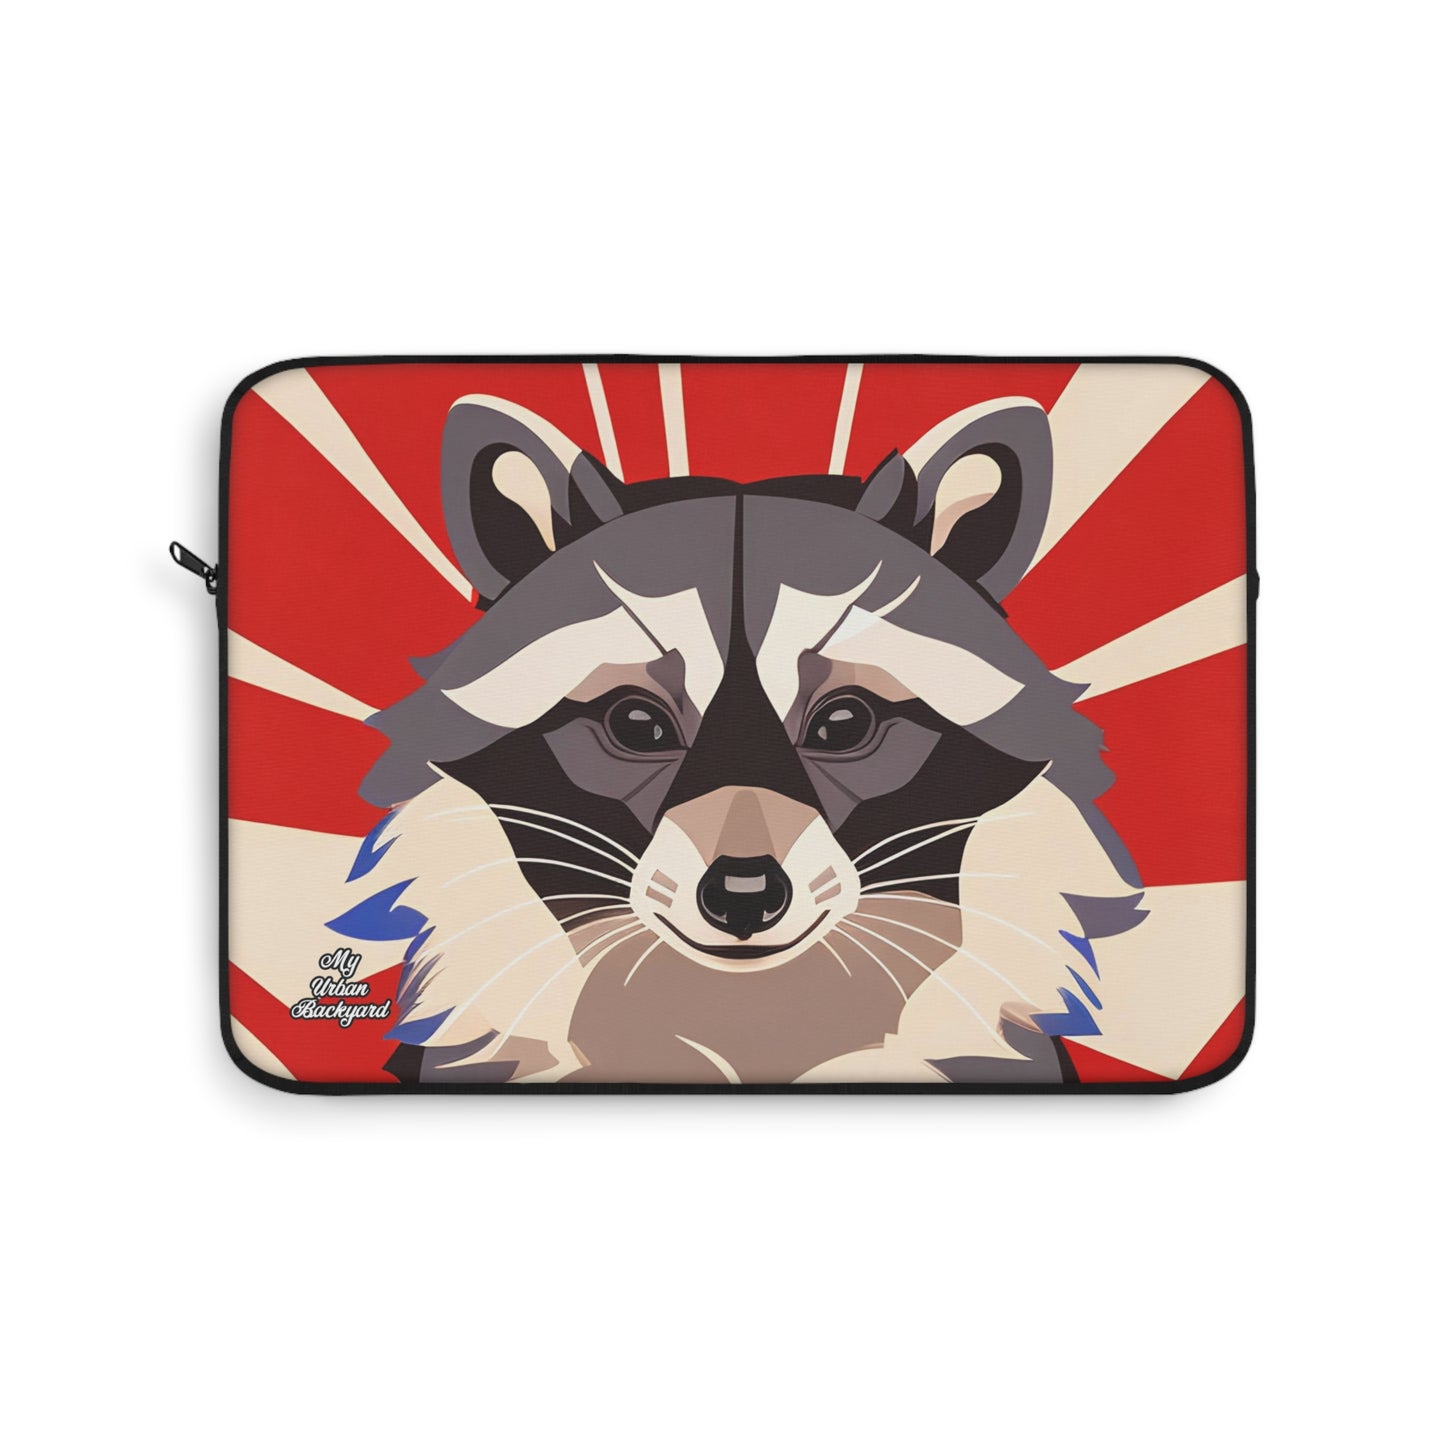 Raccoon on Art Deco Rays, Laptop Carrying Case, Top Loading Sleeve for School or Work